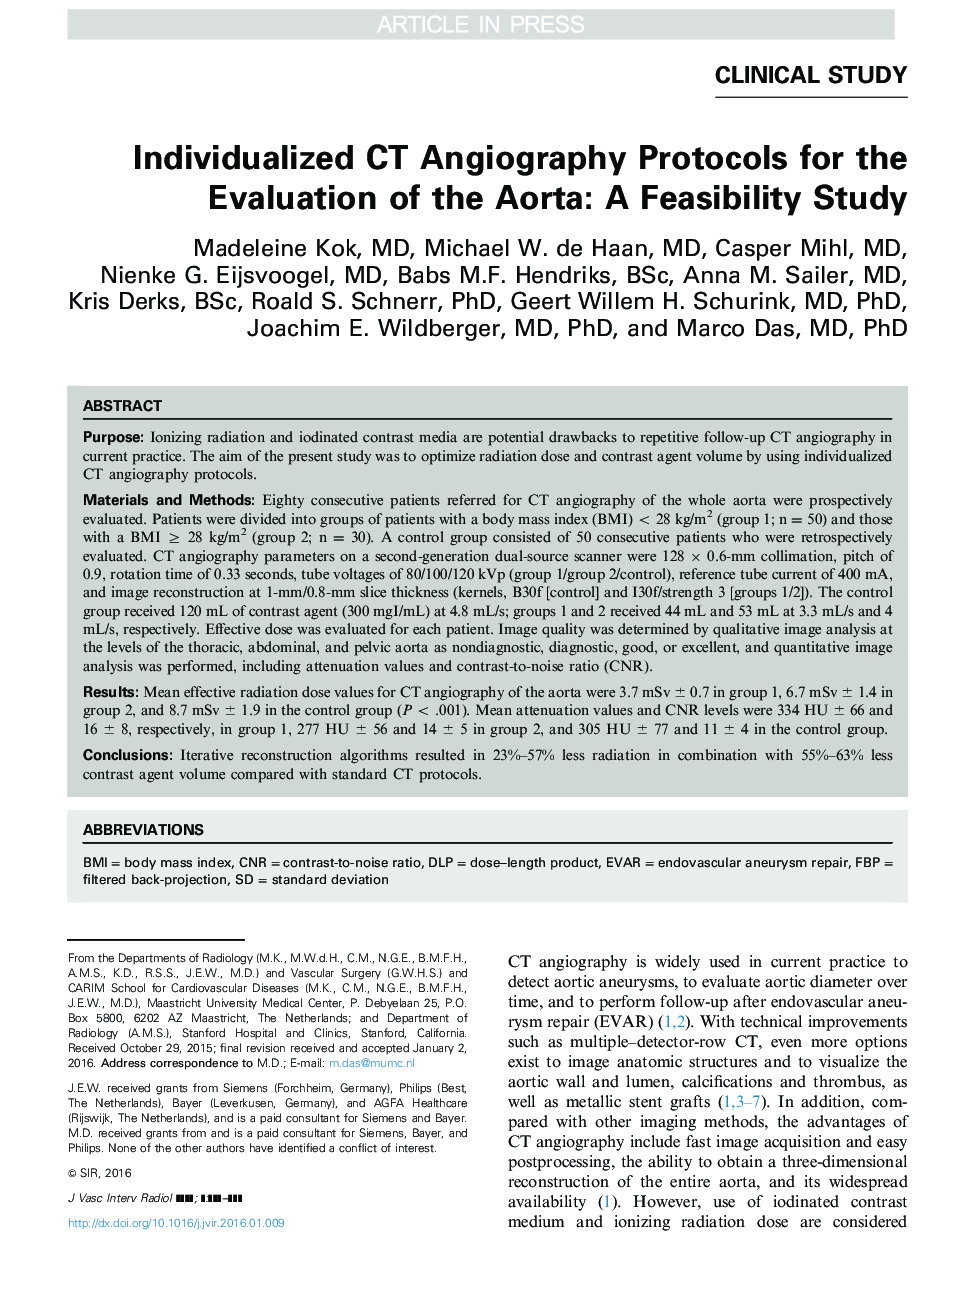 Individualized CT Angiography Protocols for the Evaluation of the Aorta: A Feasibility Study